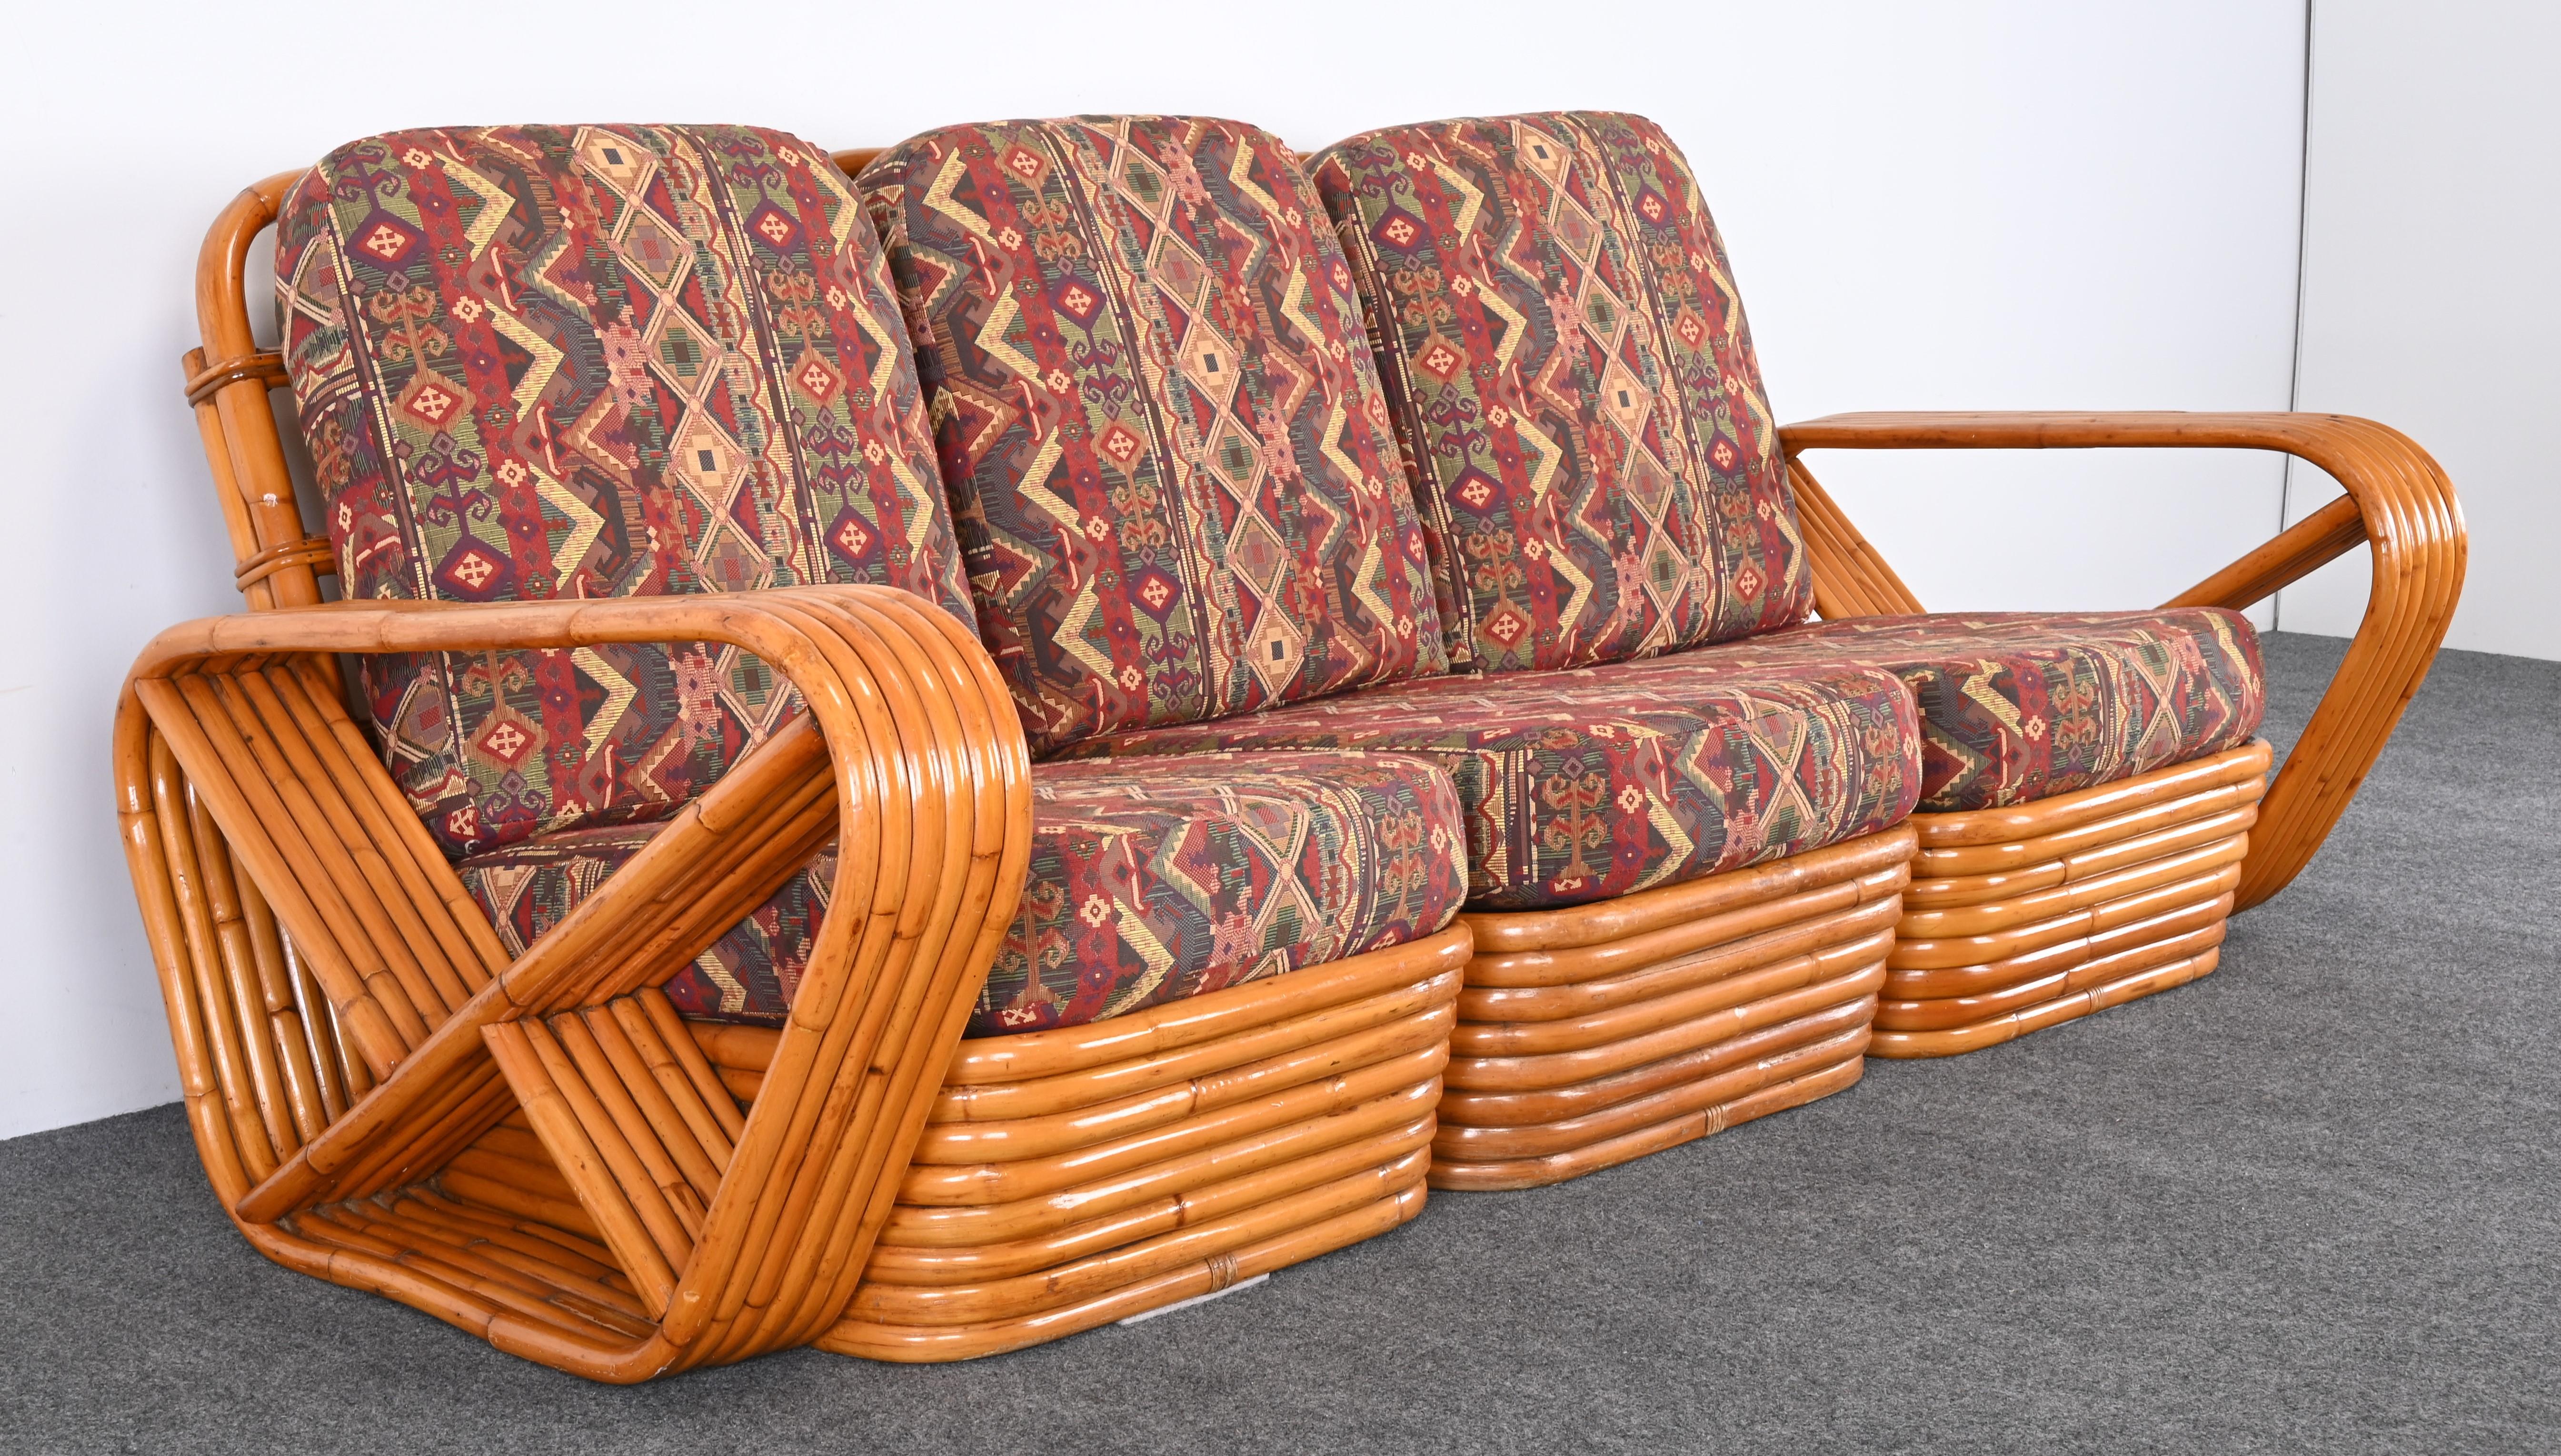 Upholstery Set of Paul Frankl Style Rattan Furniture, 1940s